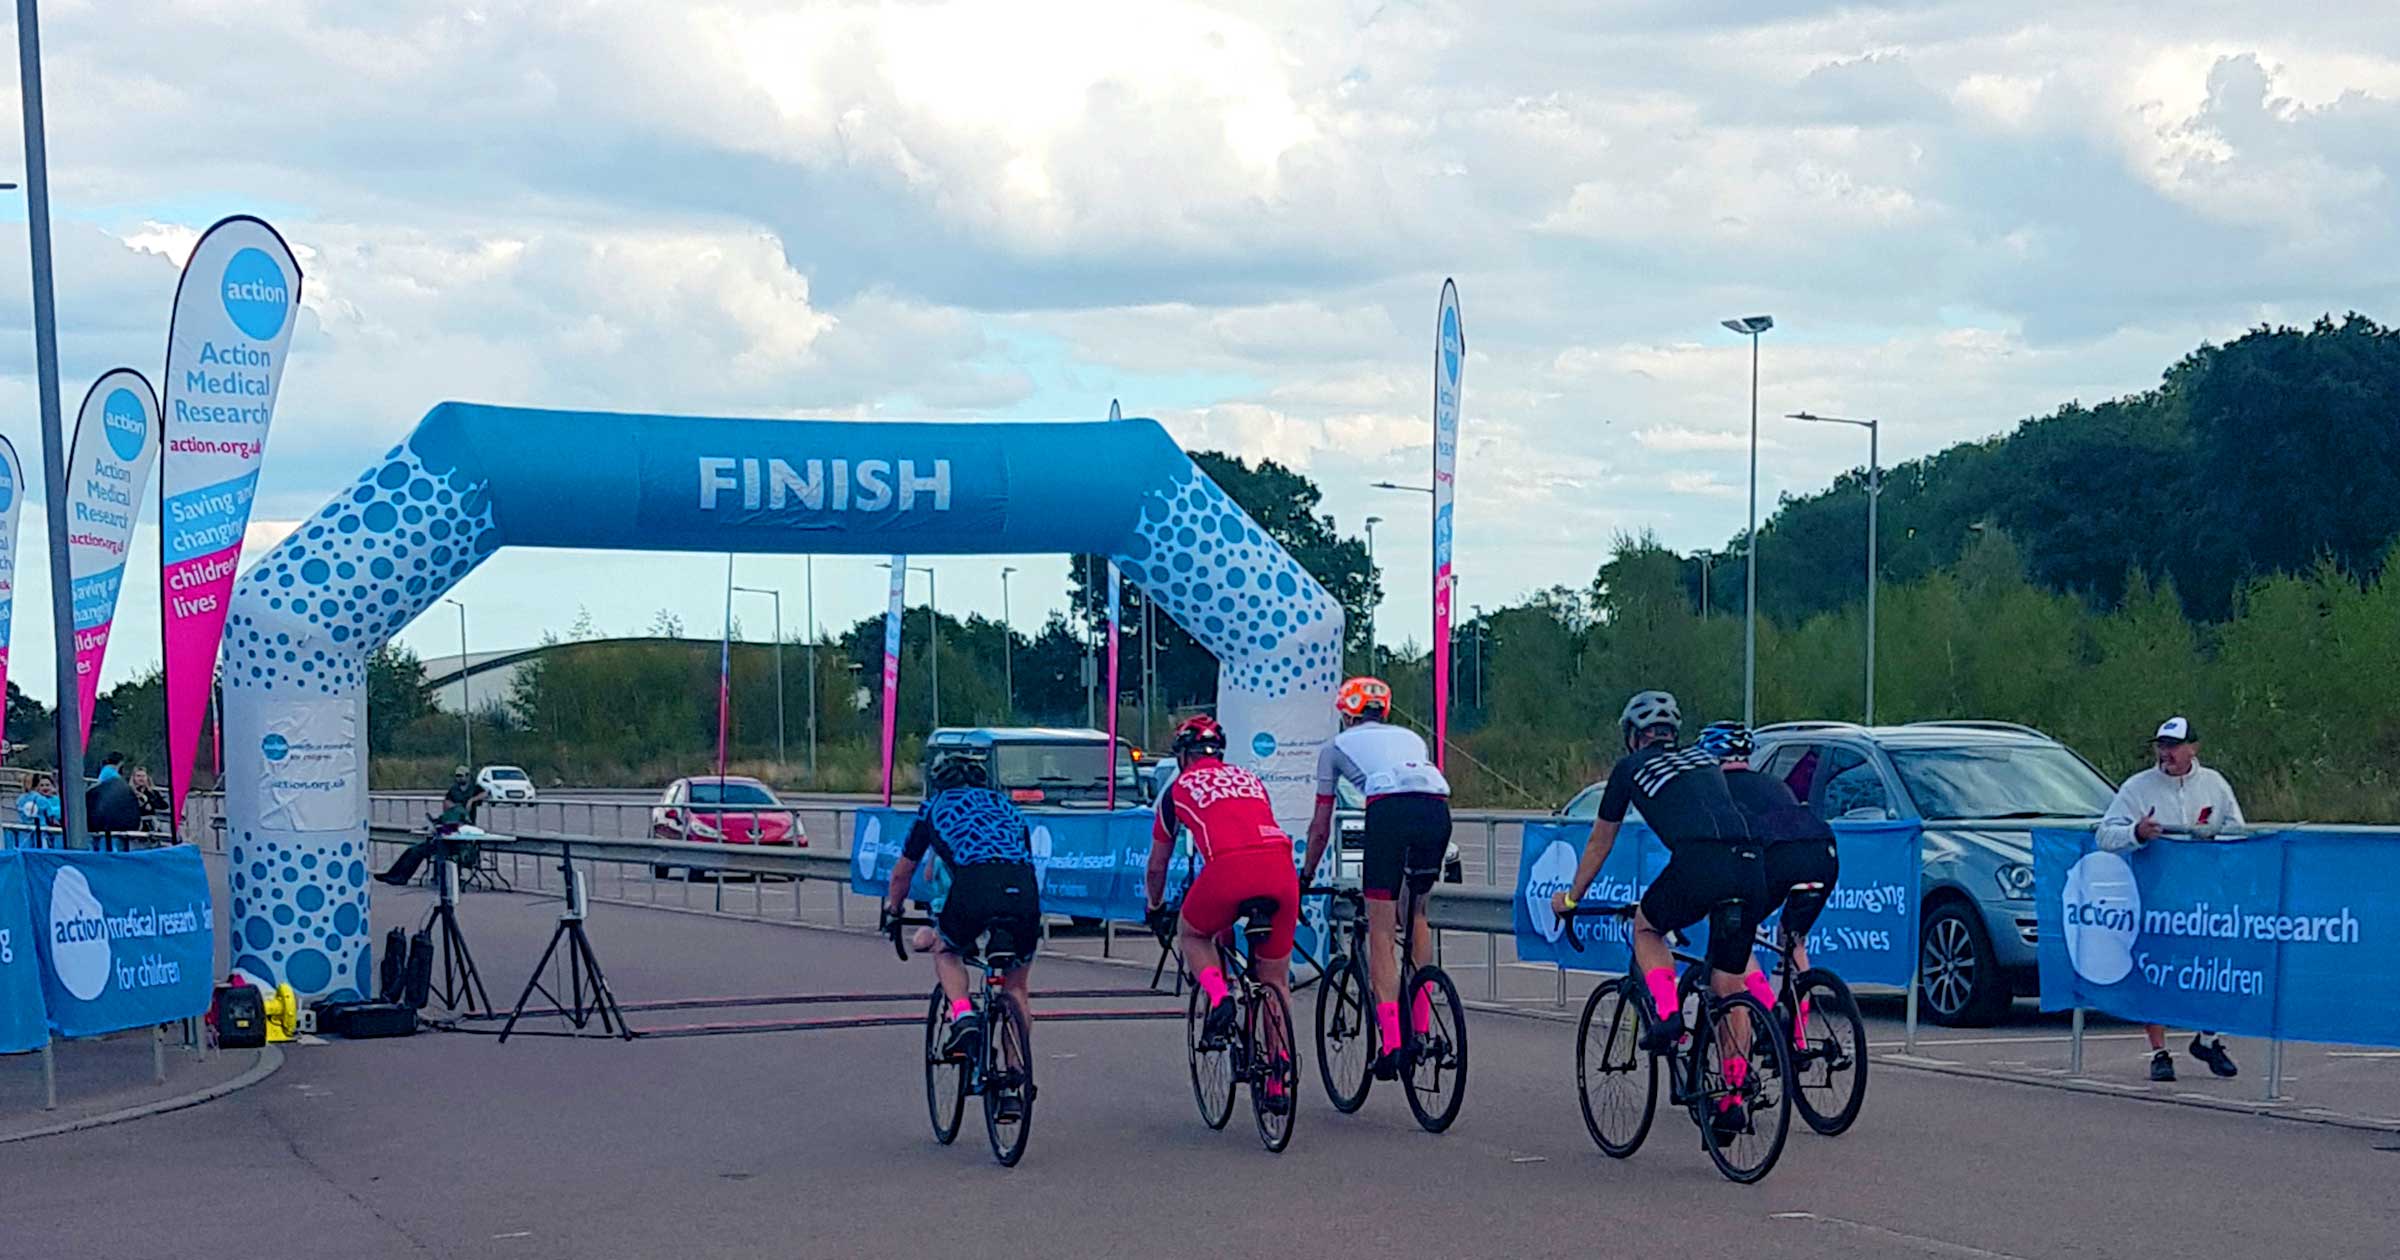 Image showing our team crossing the finish line